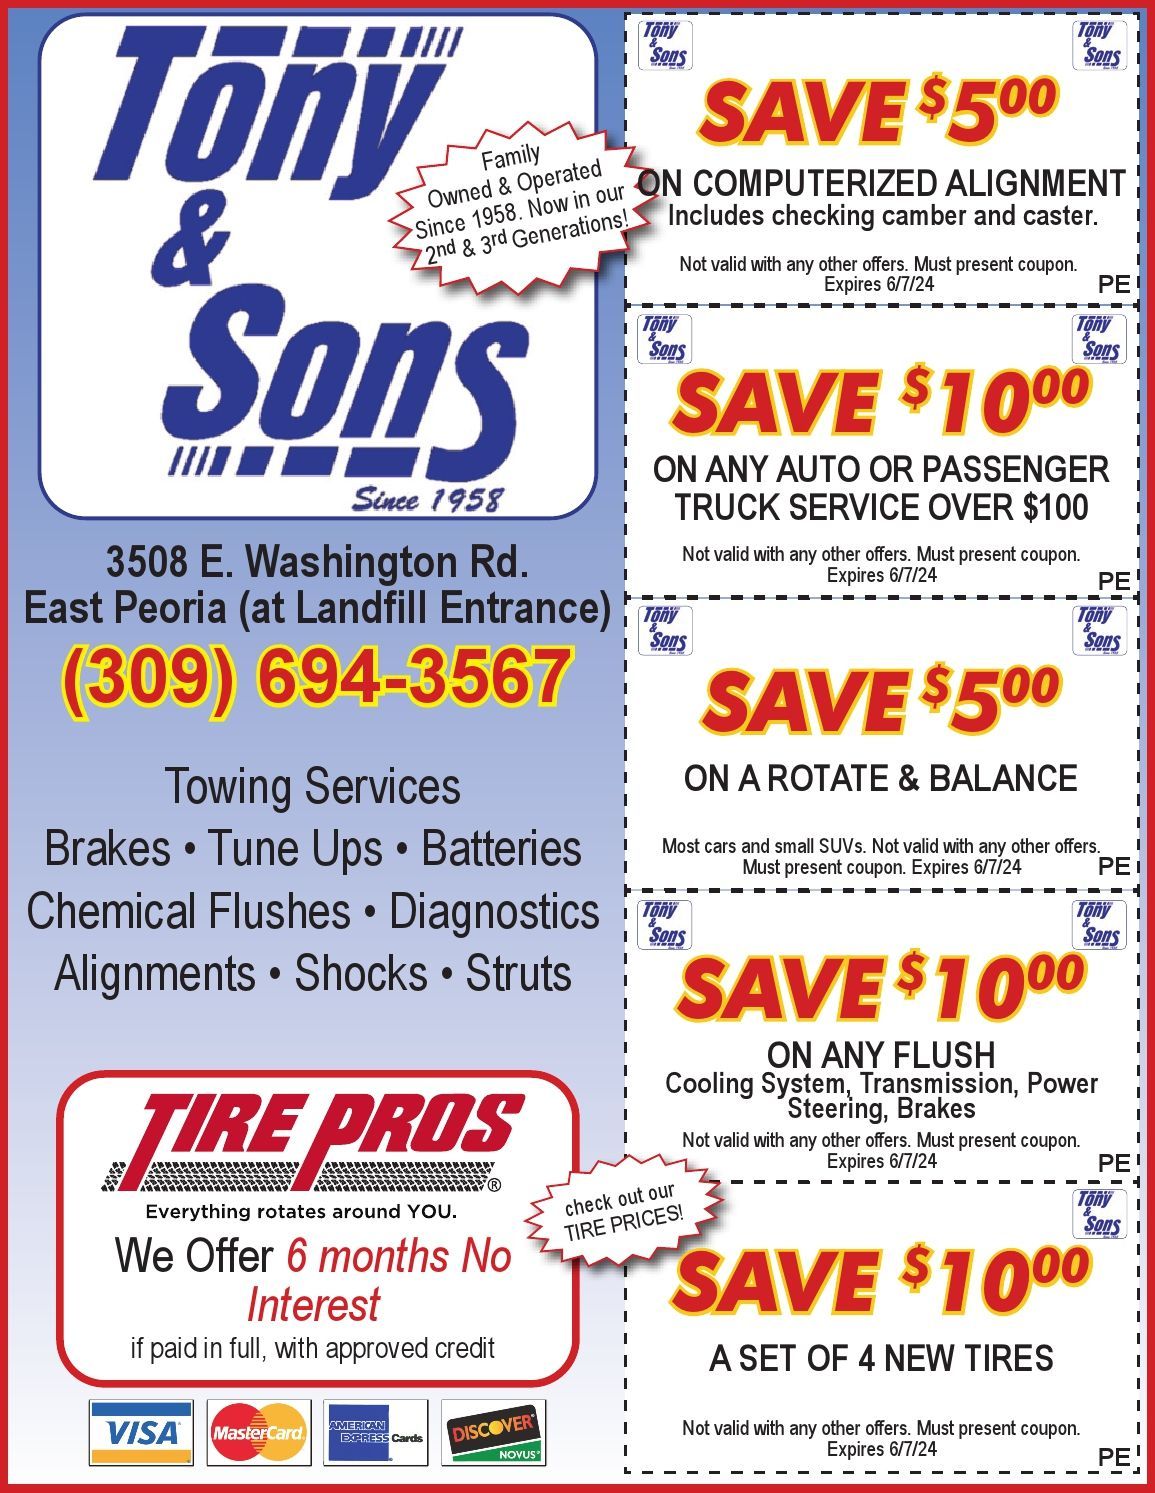 Tony and Sons complete auto service, tires, repairs, maintainence, rotate and balance, oil change coupons East Peoria, IL